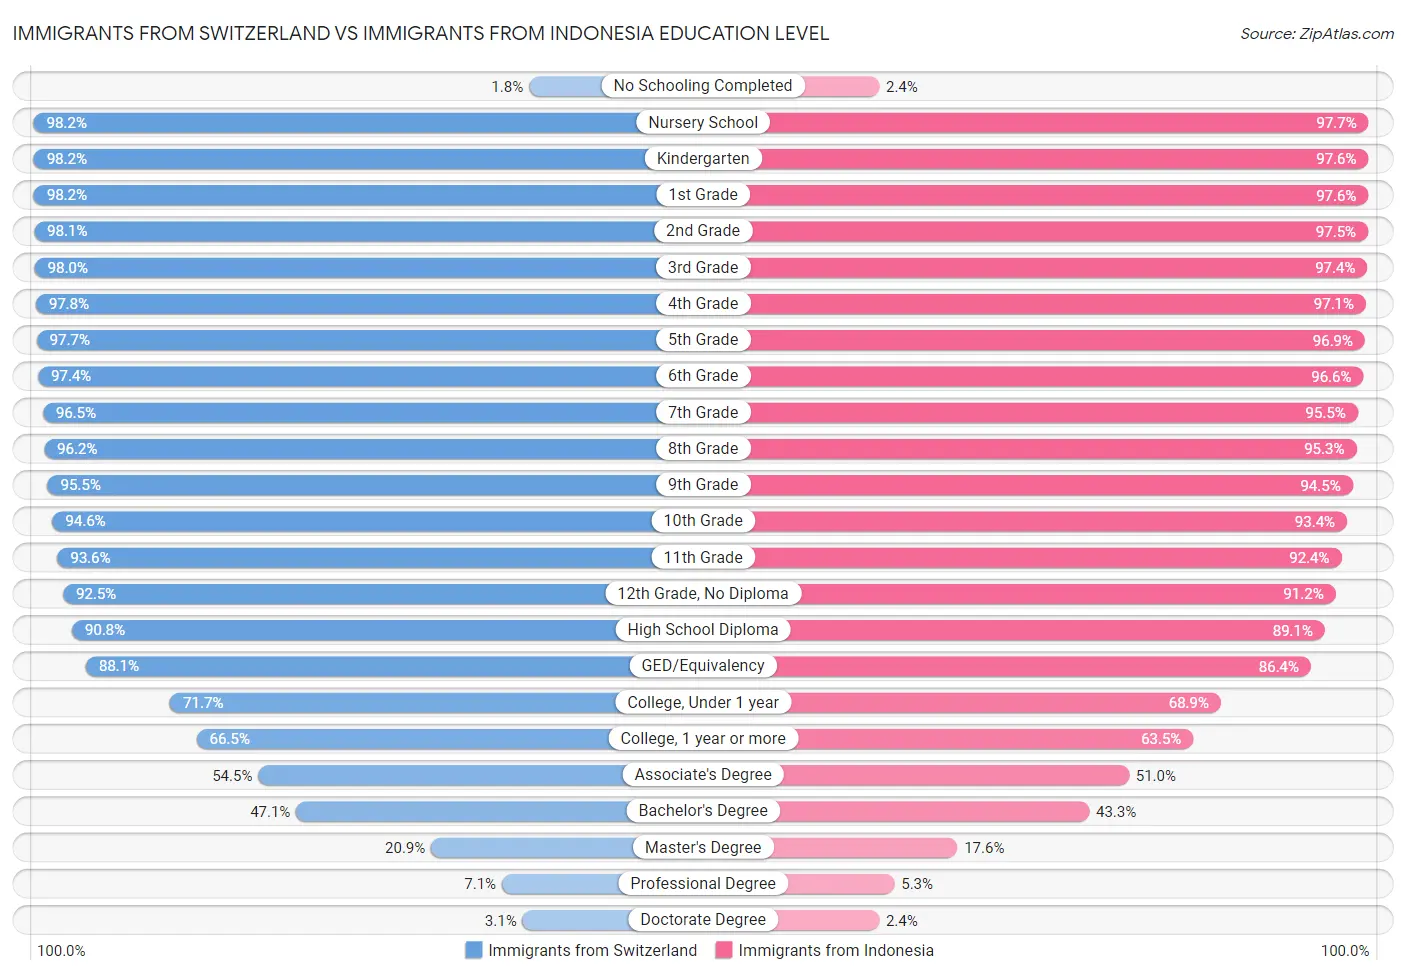 Immigrants from Switzerland vs Immigrants from Indonesia Education Level